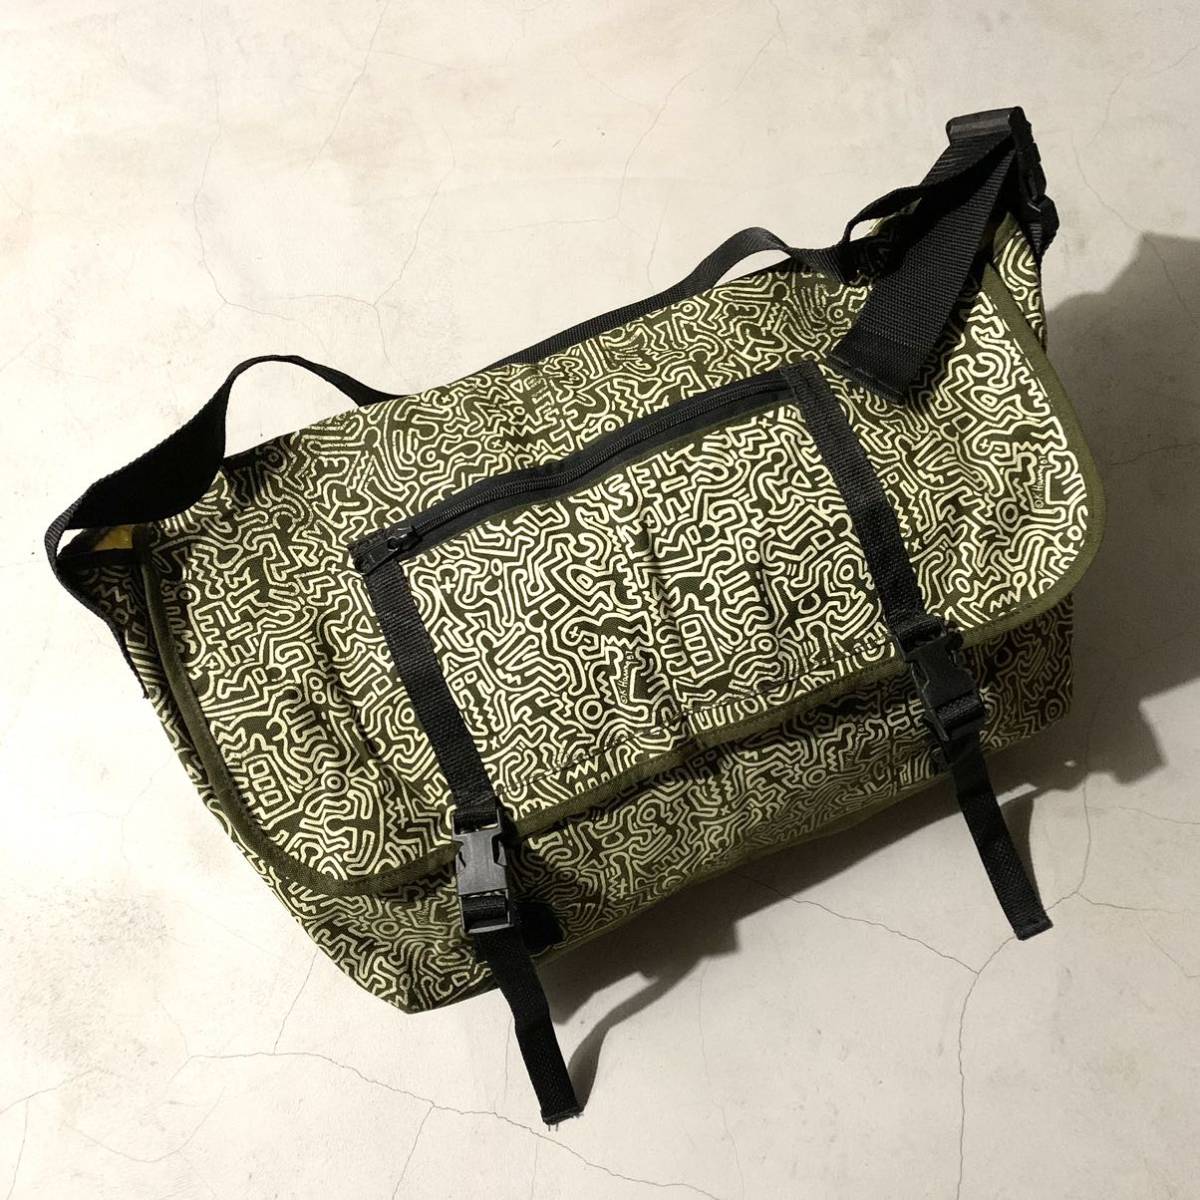 90s POP SHOP Keith Haring Keith he ring extra-large messenger bag olive × white Vintage inspection popshop USA made America made 